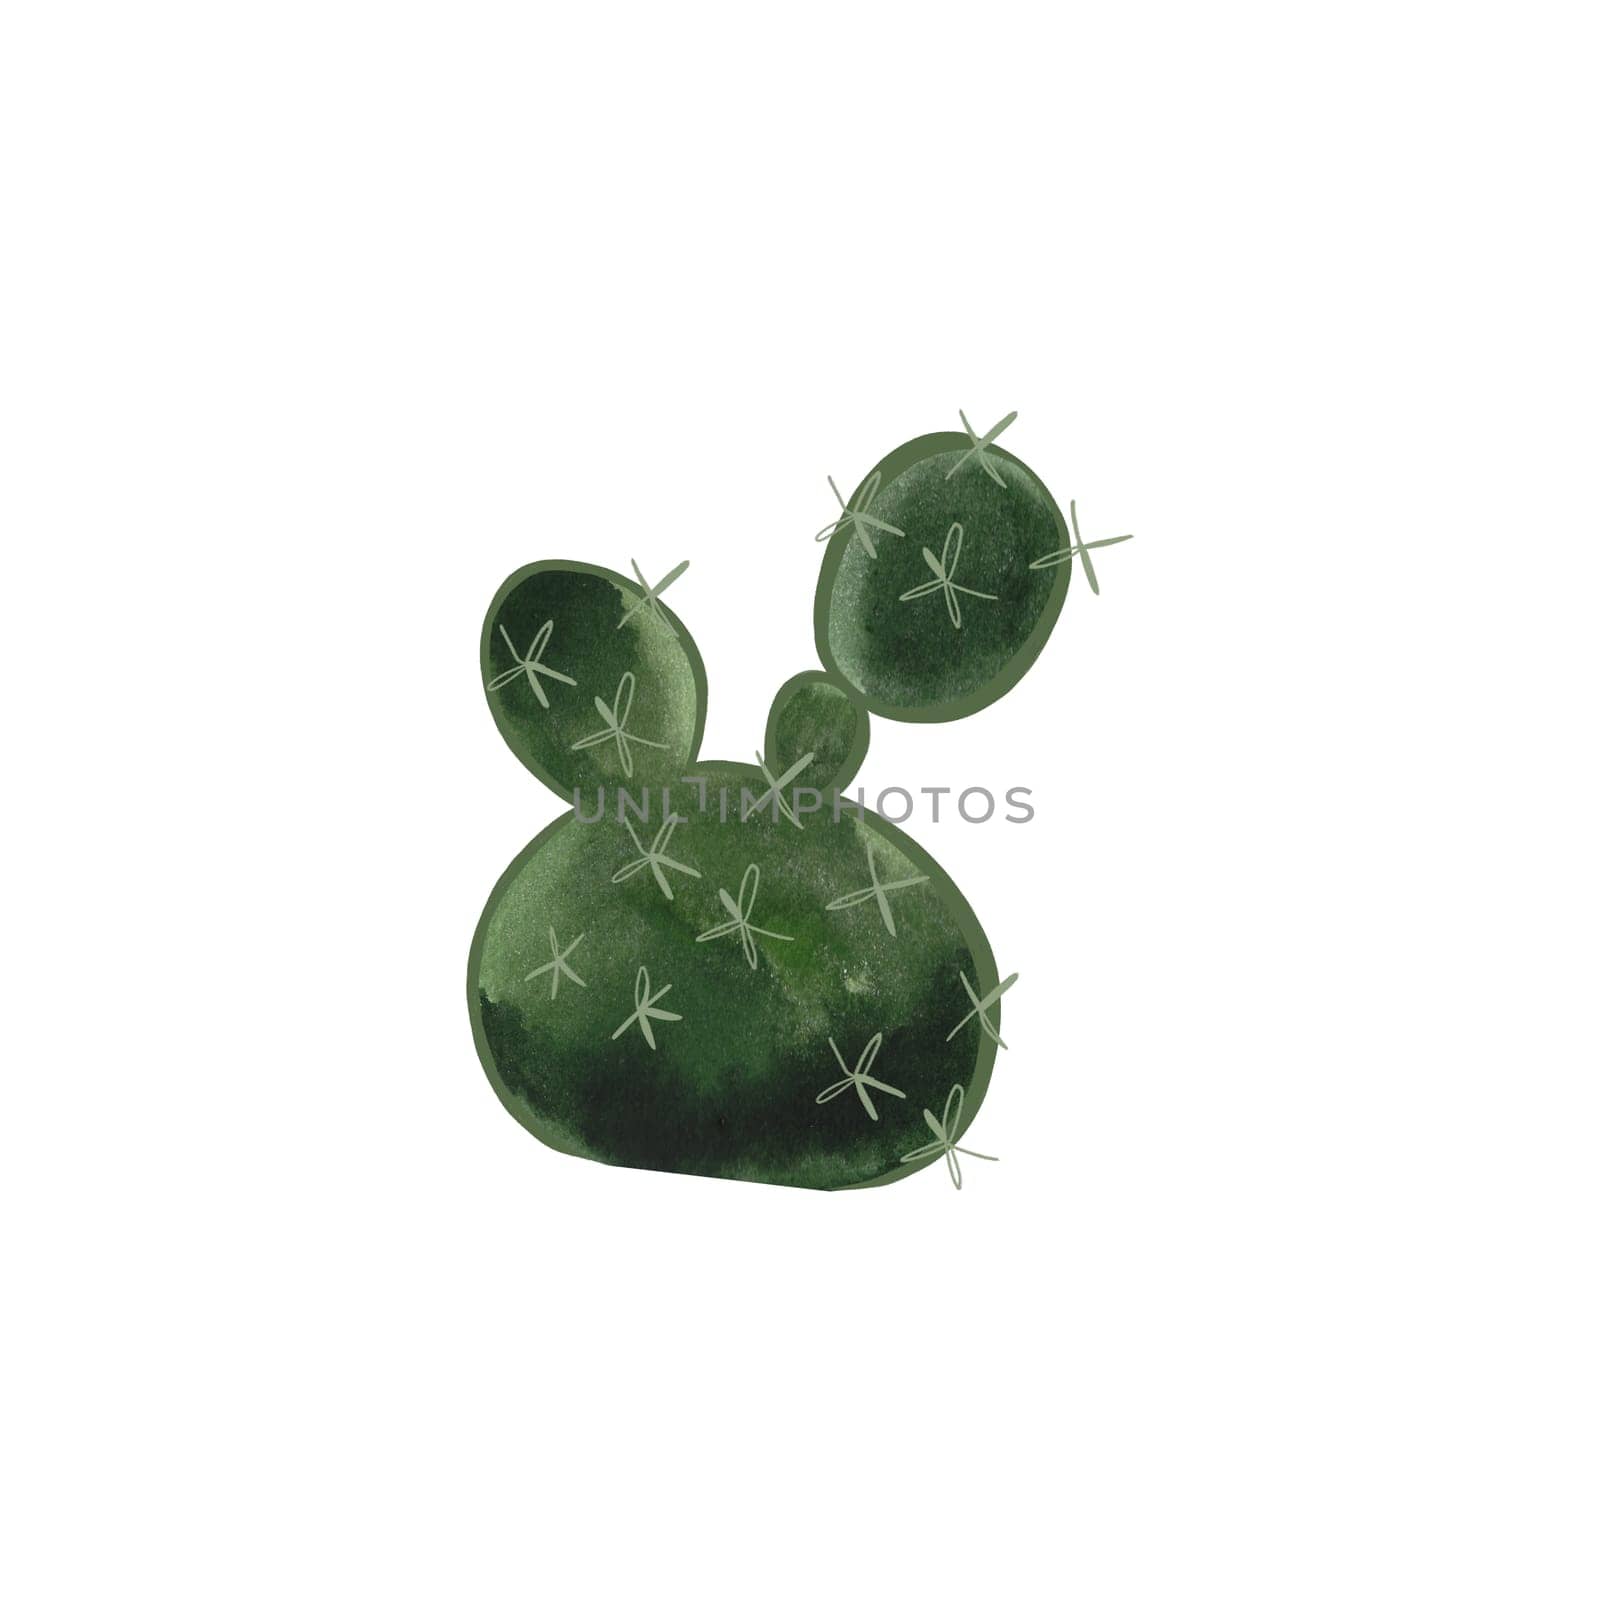 Prickle pear. Cactus. Plants for the home. Floriculture. Desert flora. Isolated watercolor illustration on white background. Clipart